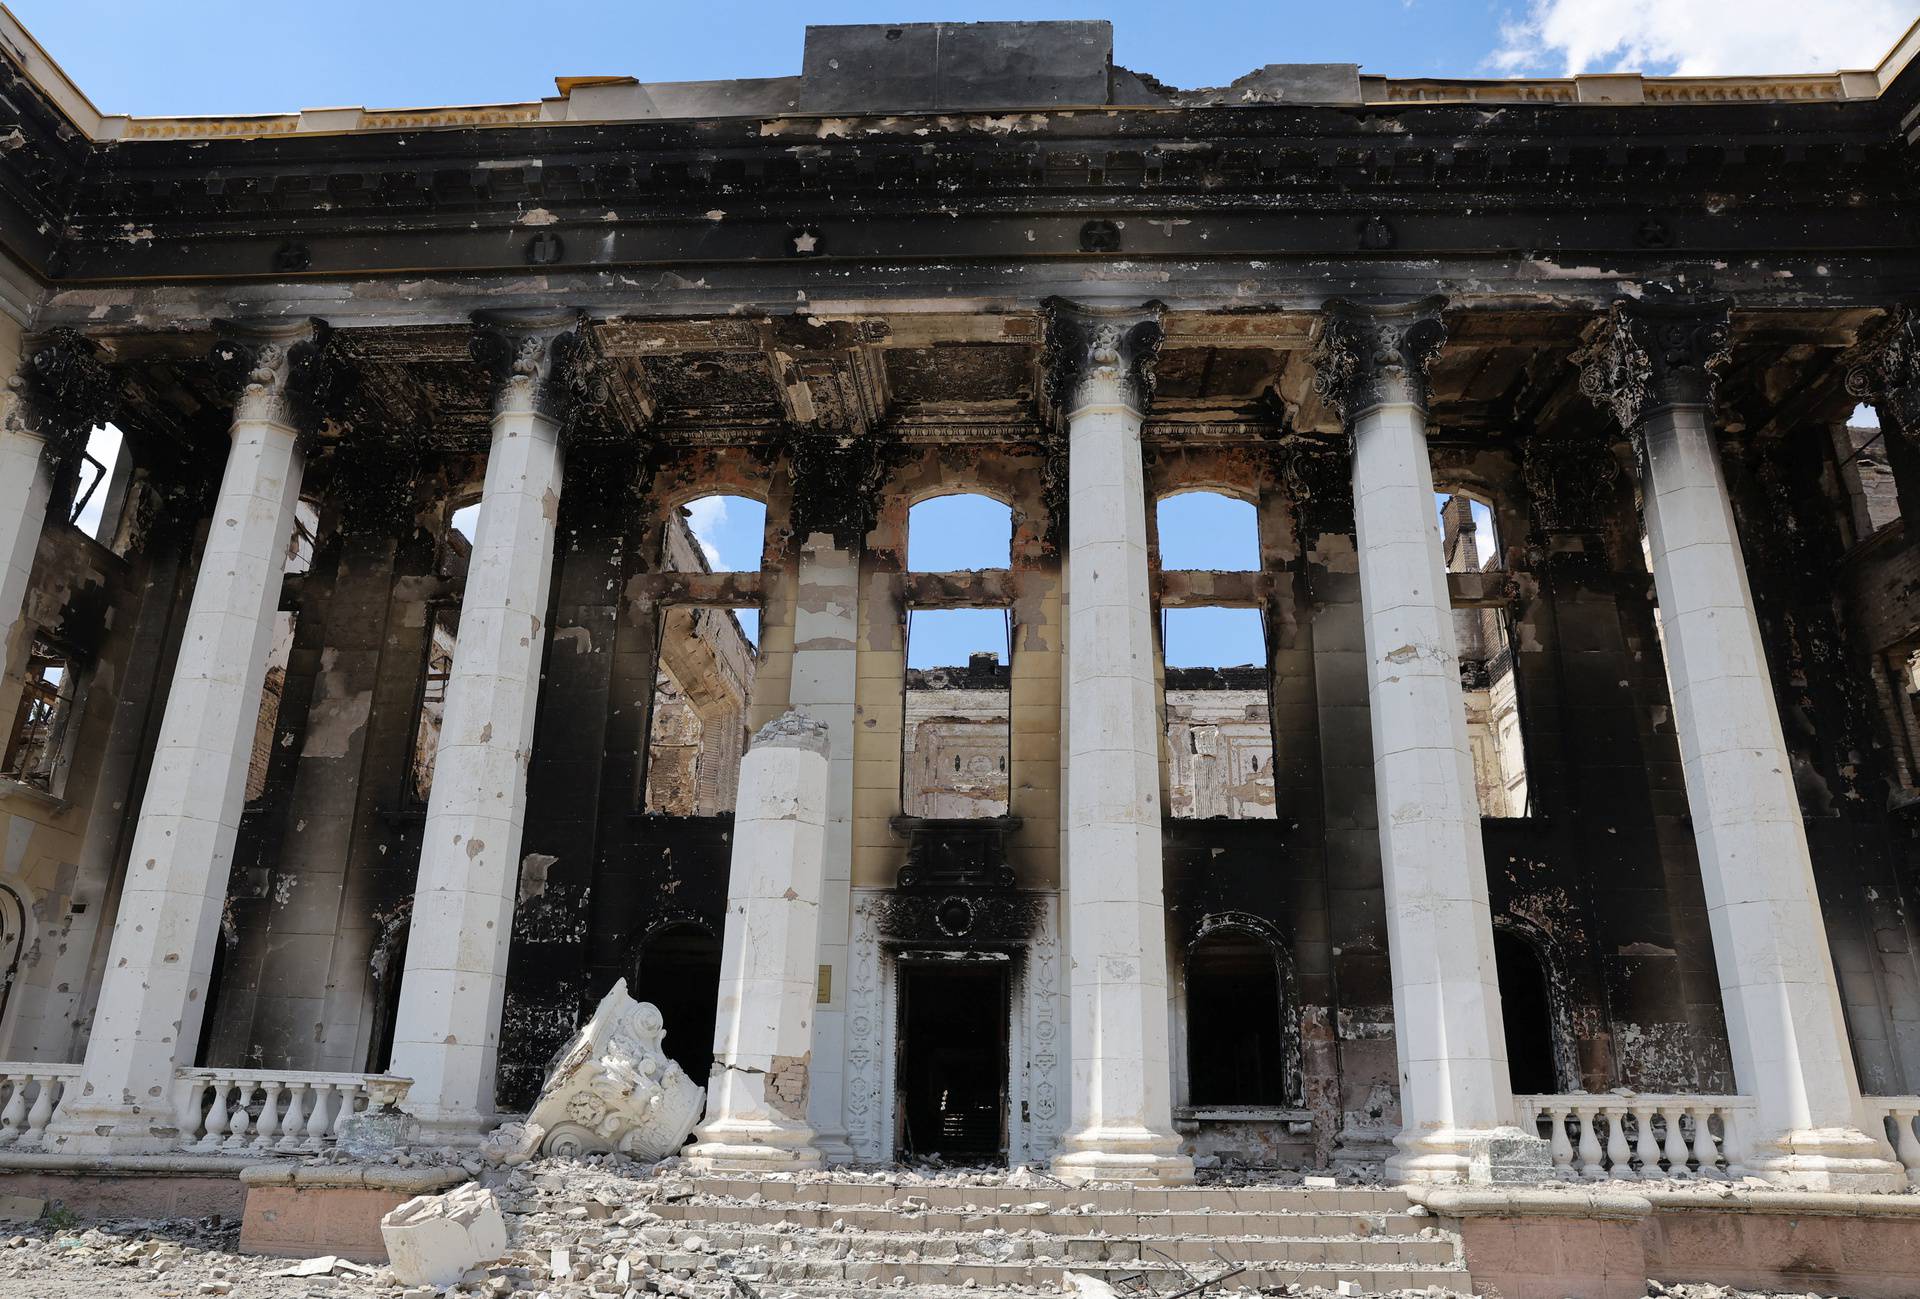 A view shows a destroyed public building in Lysychansk